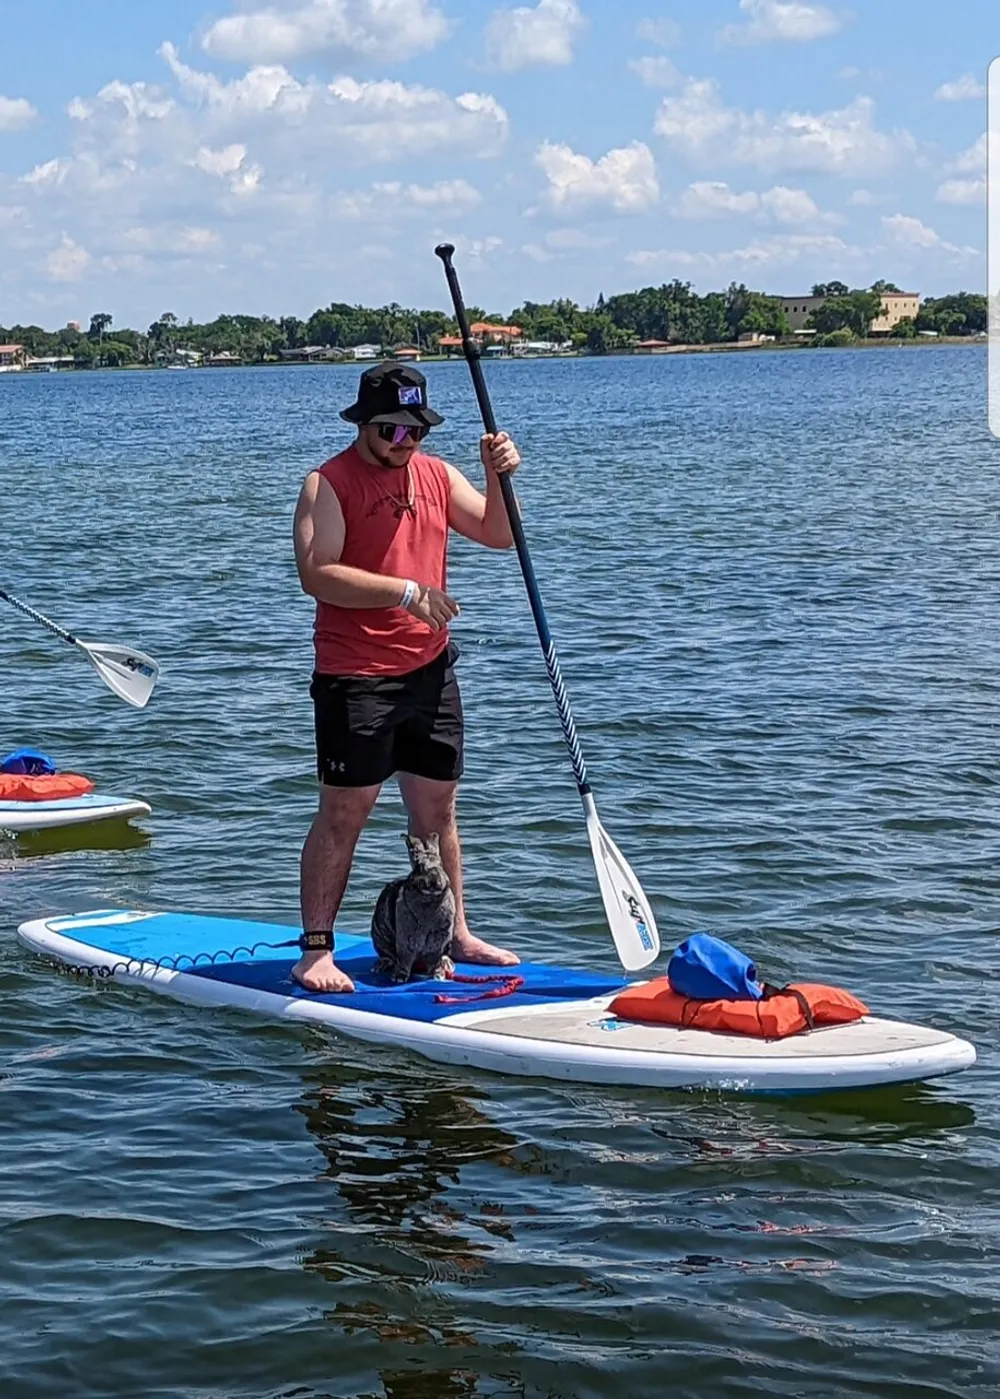 A person stands paddle boarding on calm water with a dog sitting on the front of the board